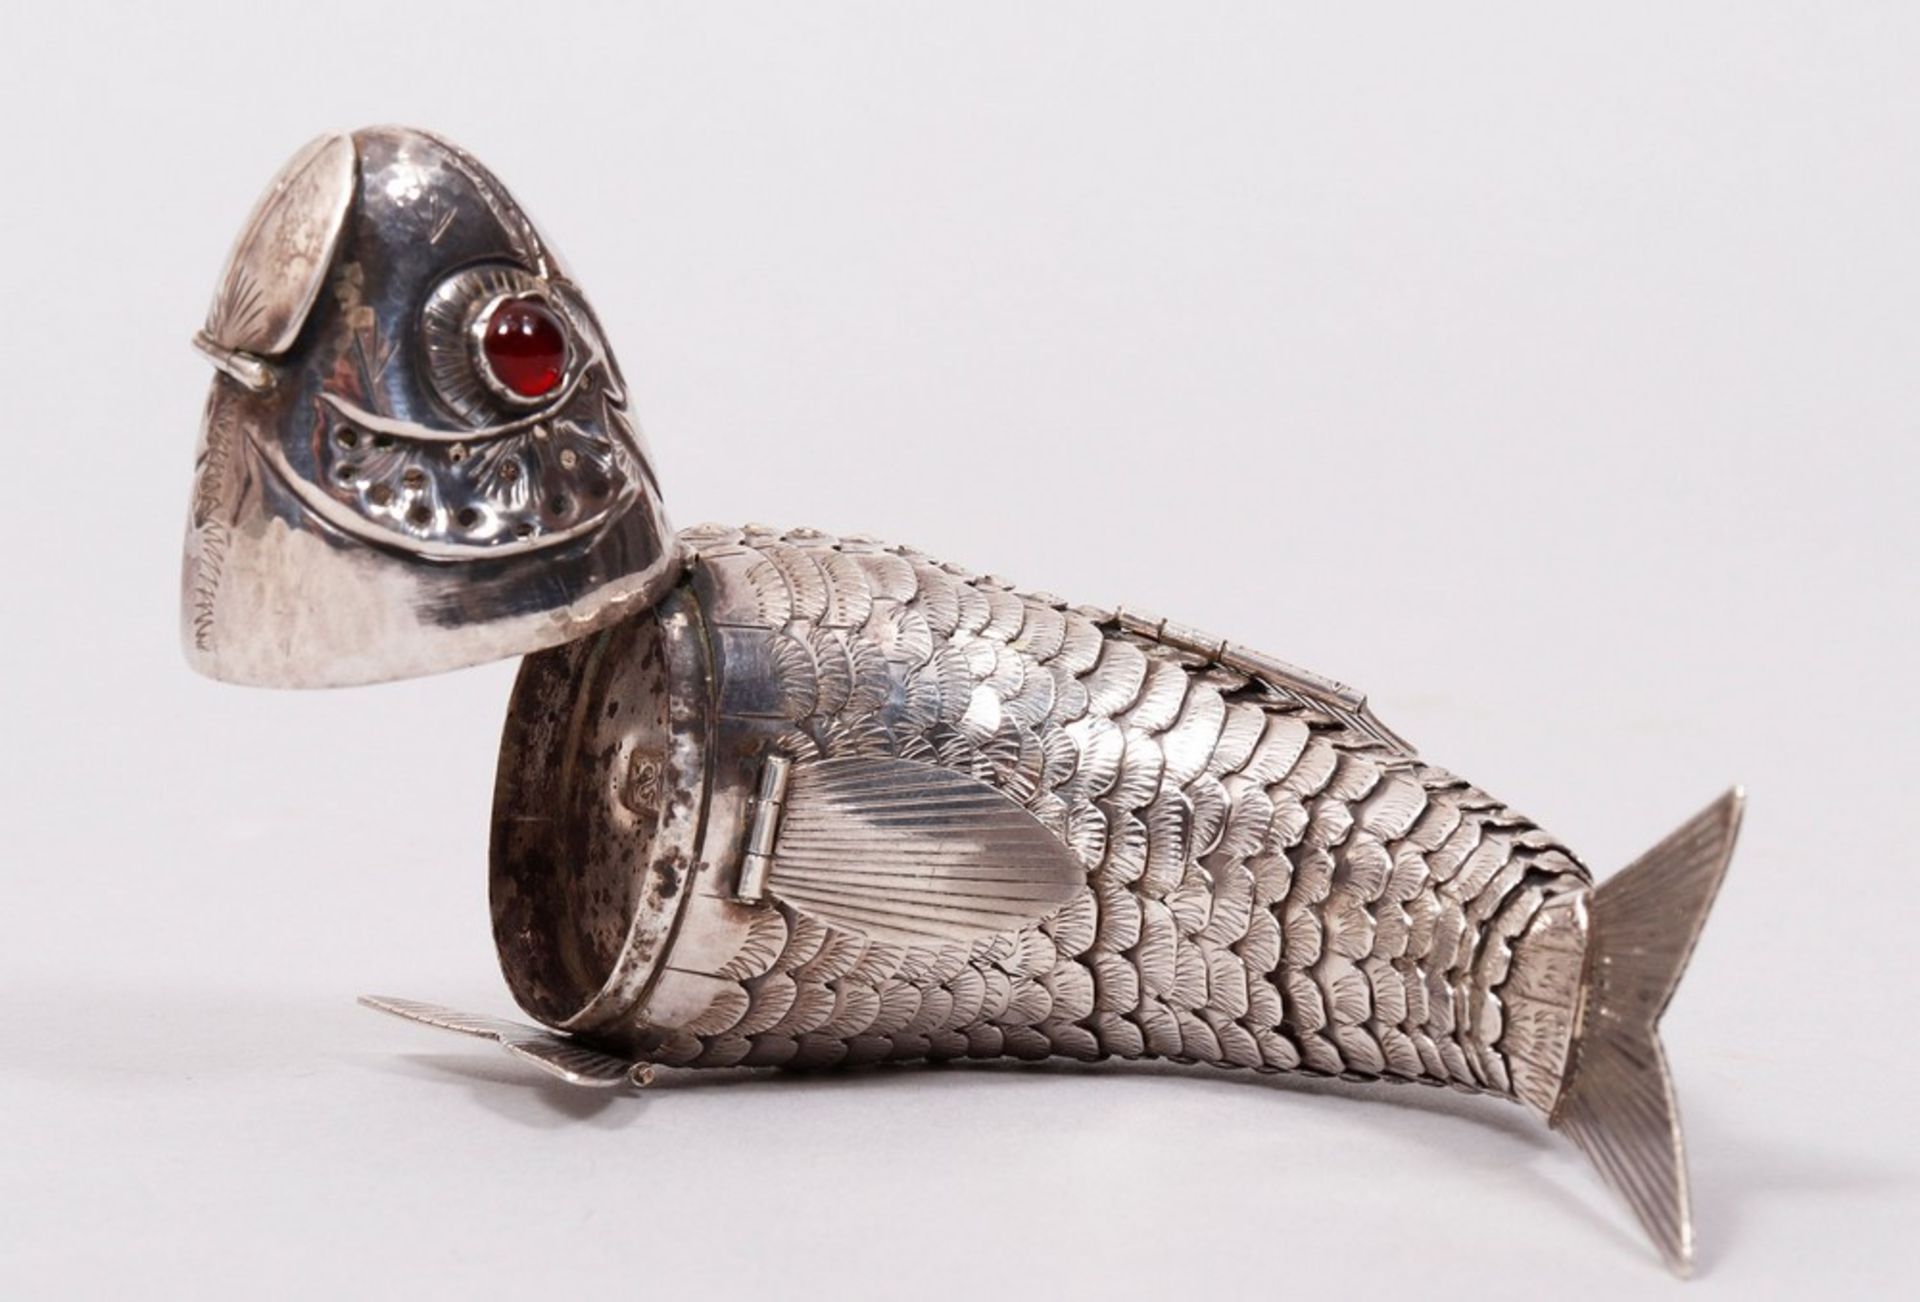 Besamim box in shape of a fish, 830 silver, probably Scandinavia, 19th C. - Image 2 of 7